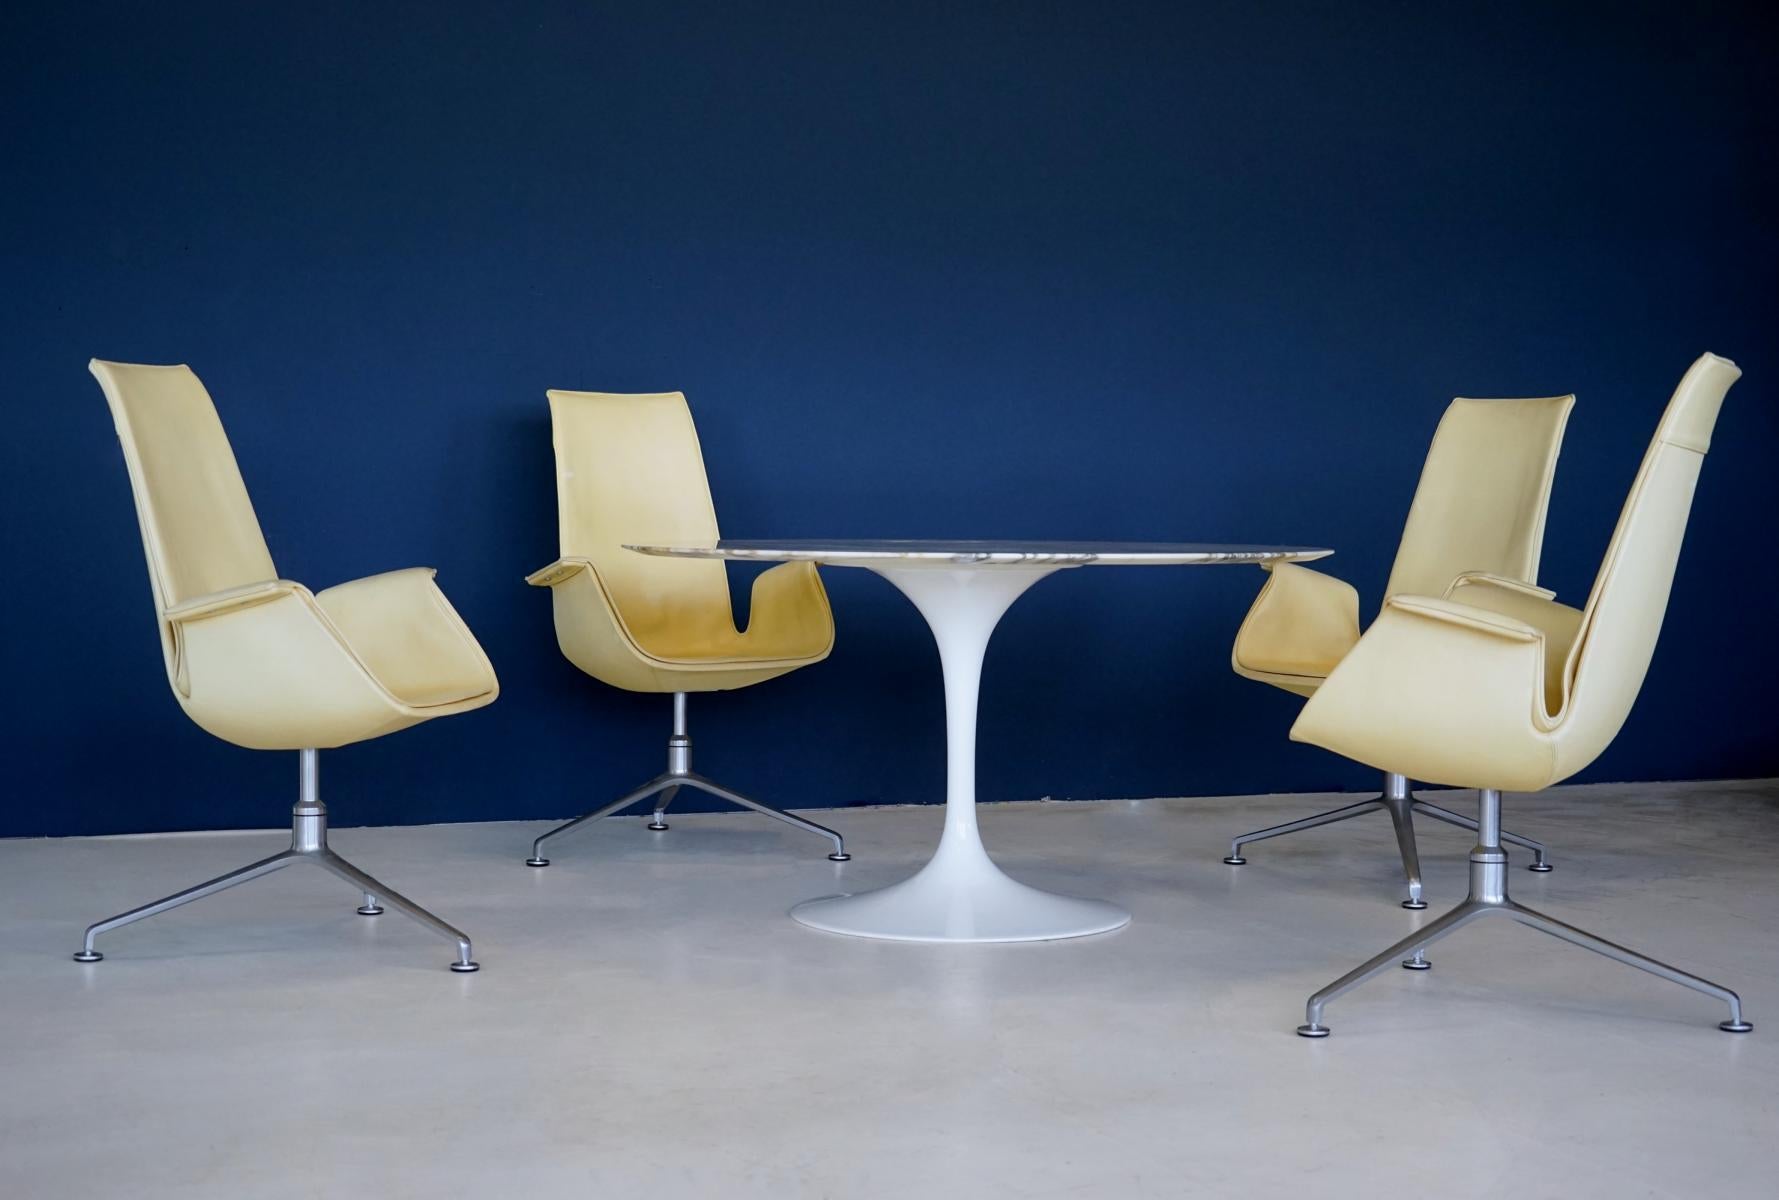 Set of 4 Fabricius & Kastholm Tulip Chair Model FK 6725

The Tulip chair, model FK 6725, was designed in 1964 by Fabricius & Kastholm for Kill International. 
This set of 4 is in a very good original condition.